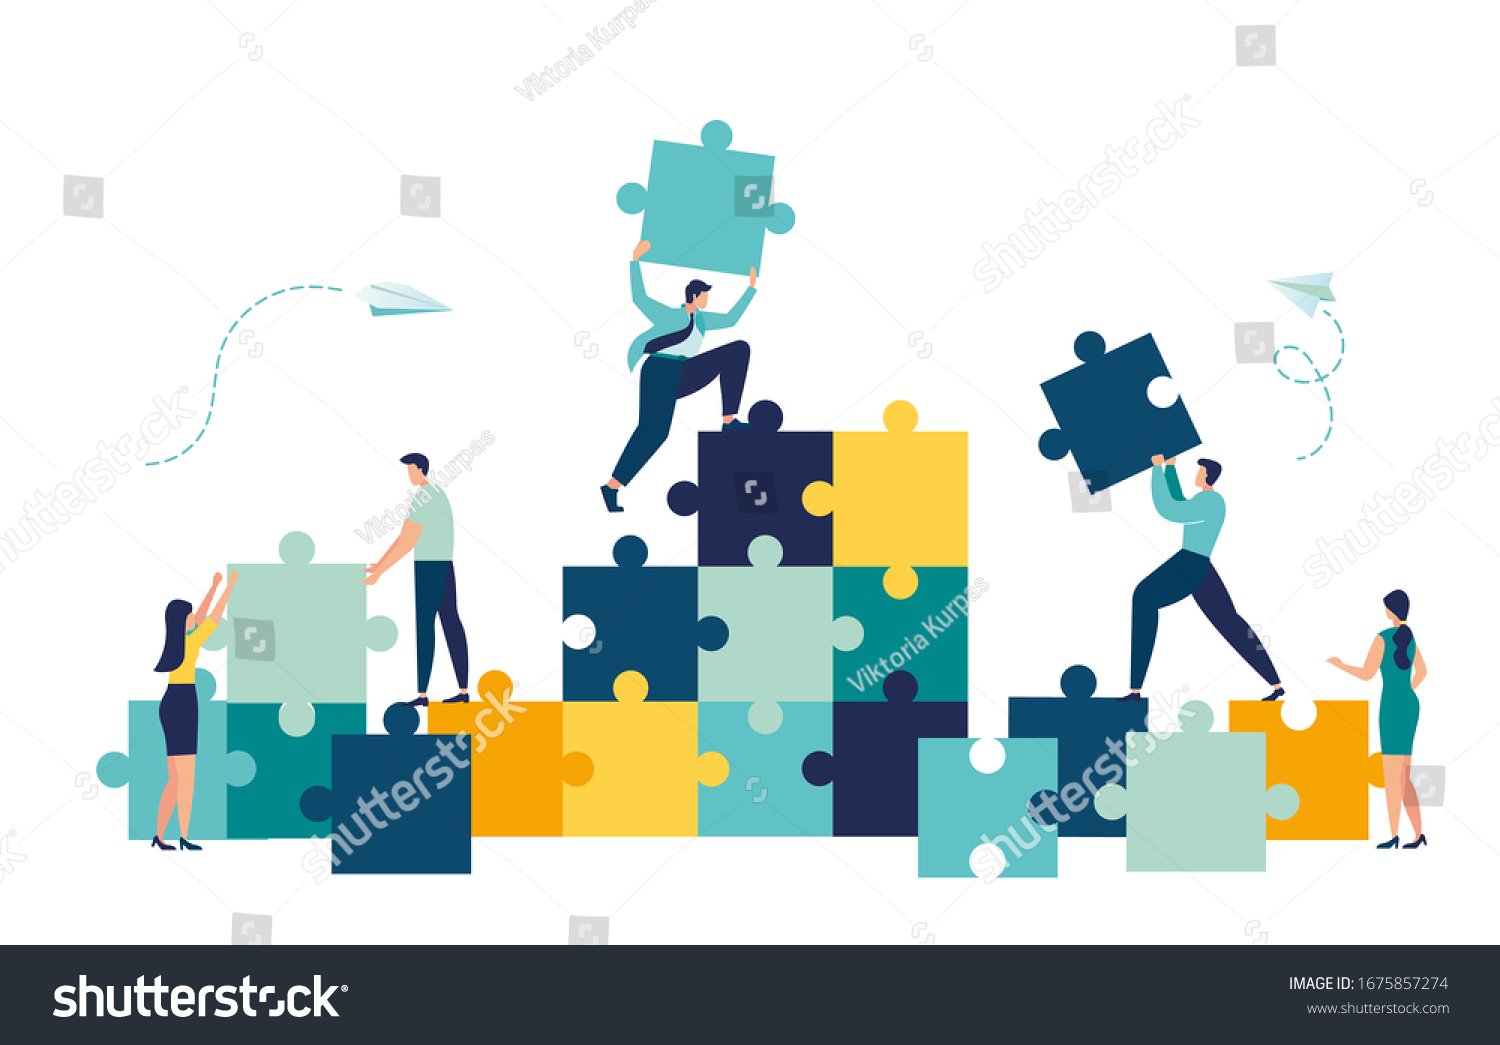 SVG of Business concept. Team metaphor. people connecting puzzle elements. Vector illustration flat design style. Symbol of teamwork, cooperation, partnership vector svg